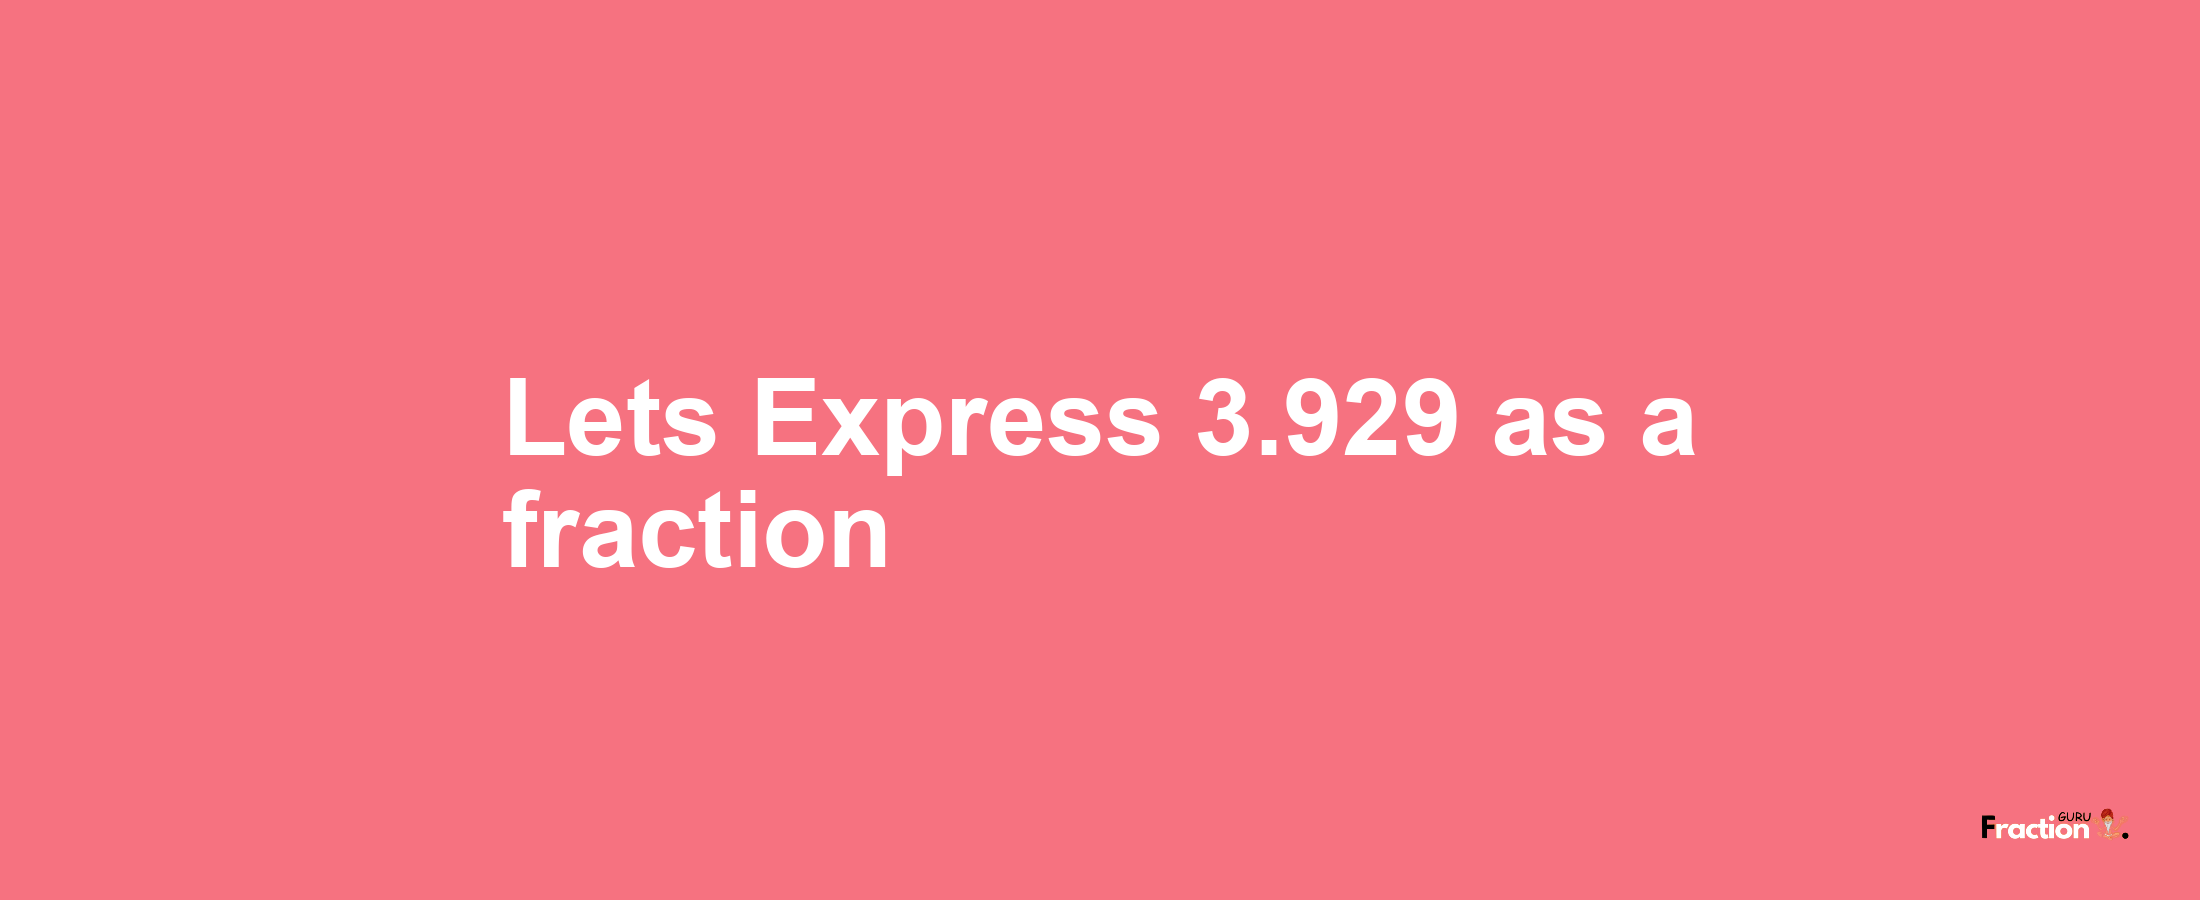 Lets Express 3.929 as afraction